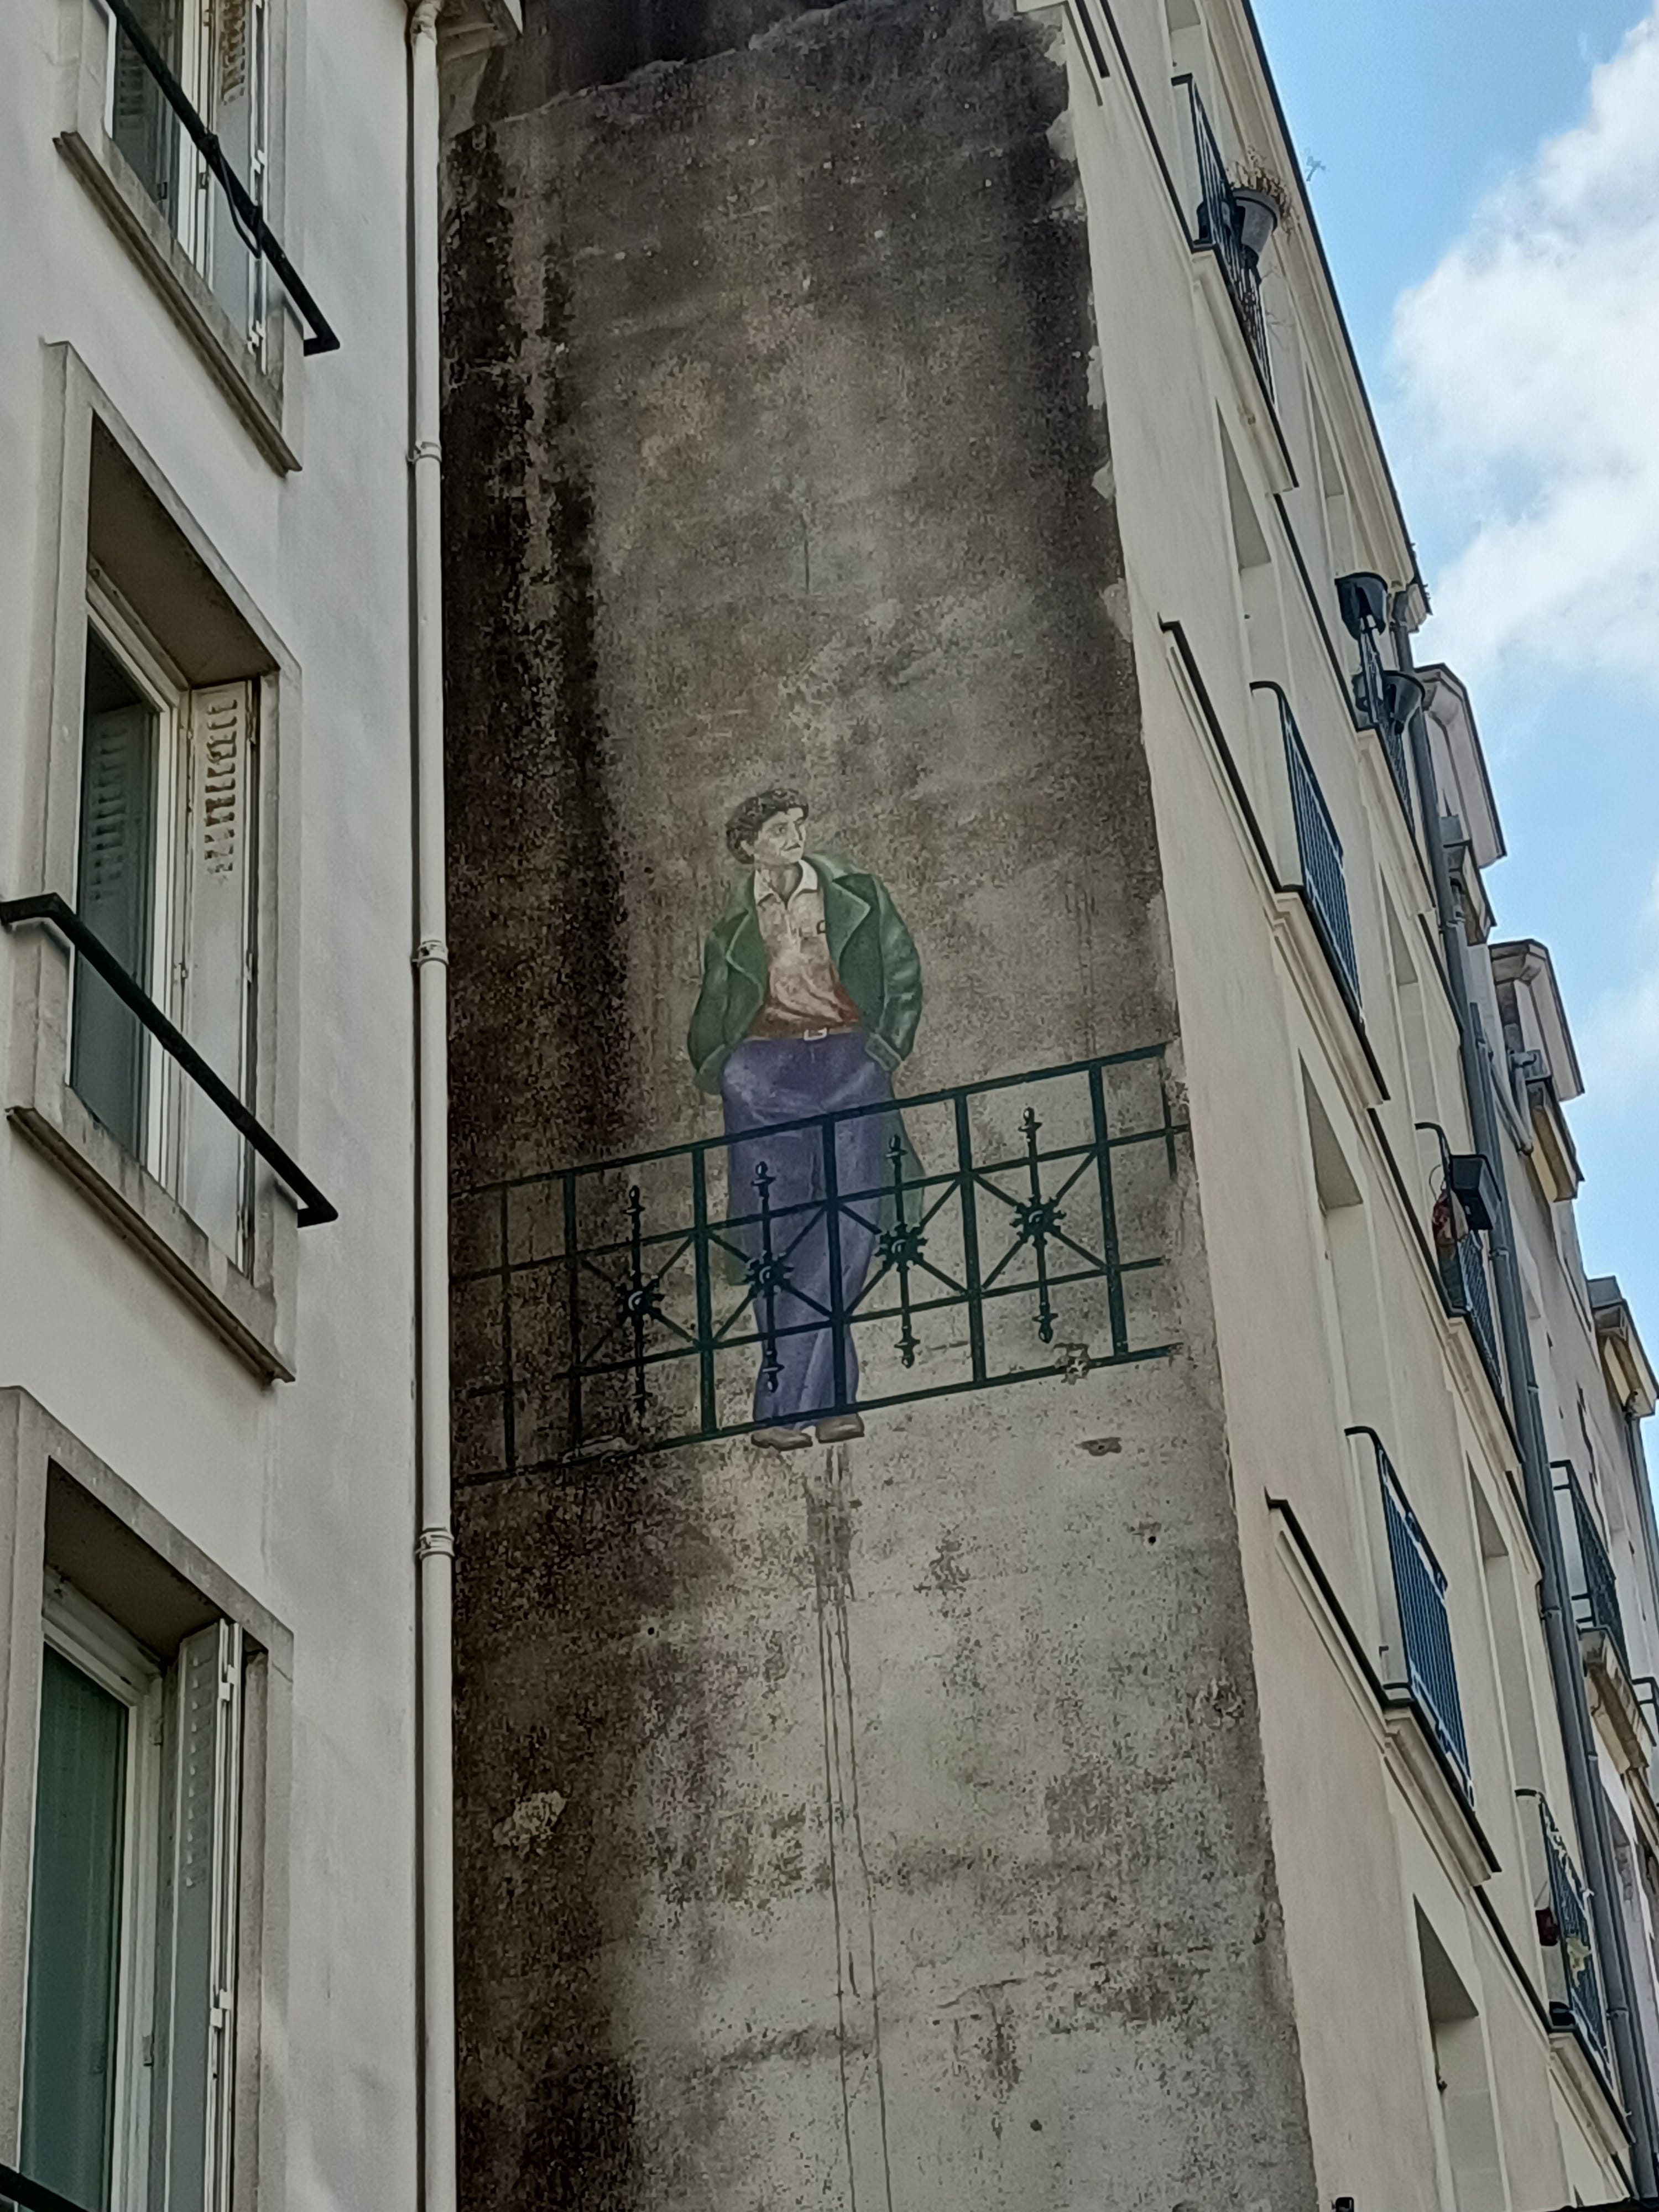 Graffiti 5188 Homme au balcon captured by Rabot in Nantes France